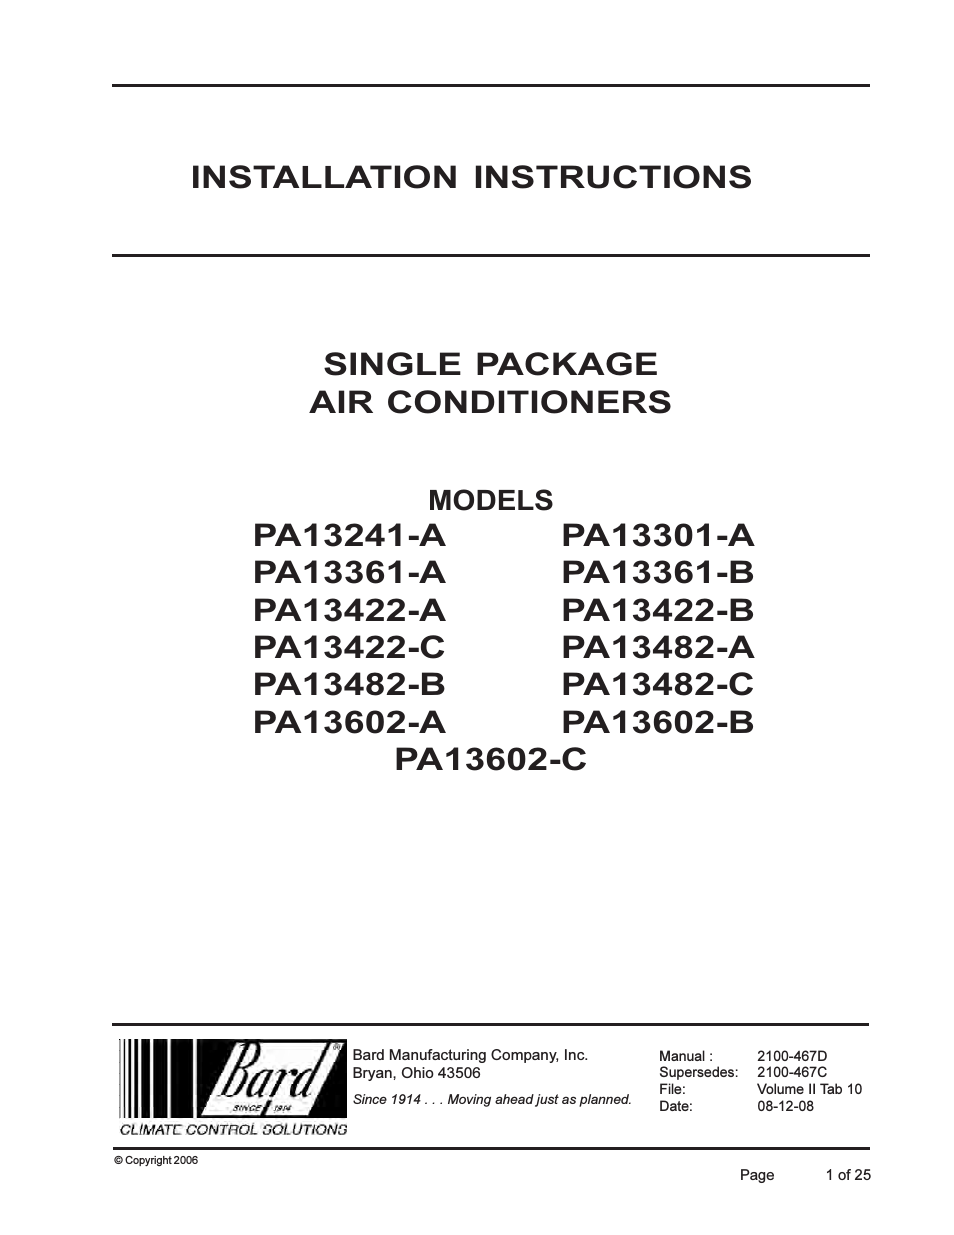 Single Package Air Conditioners PA13602-C